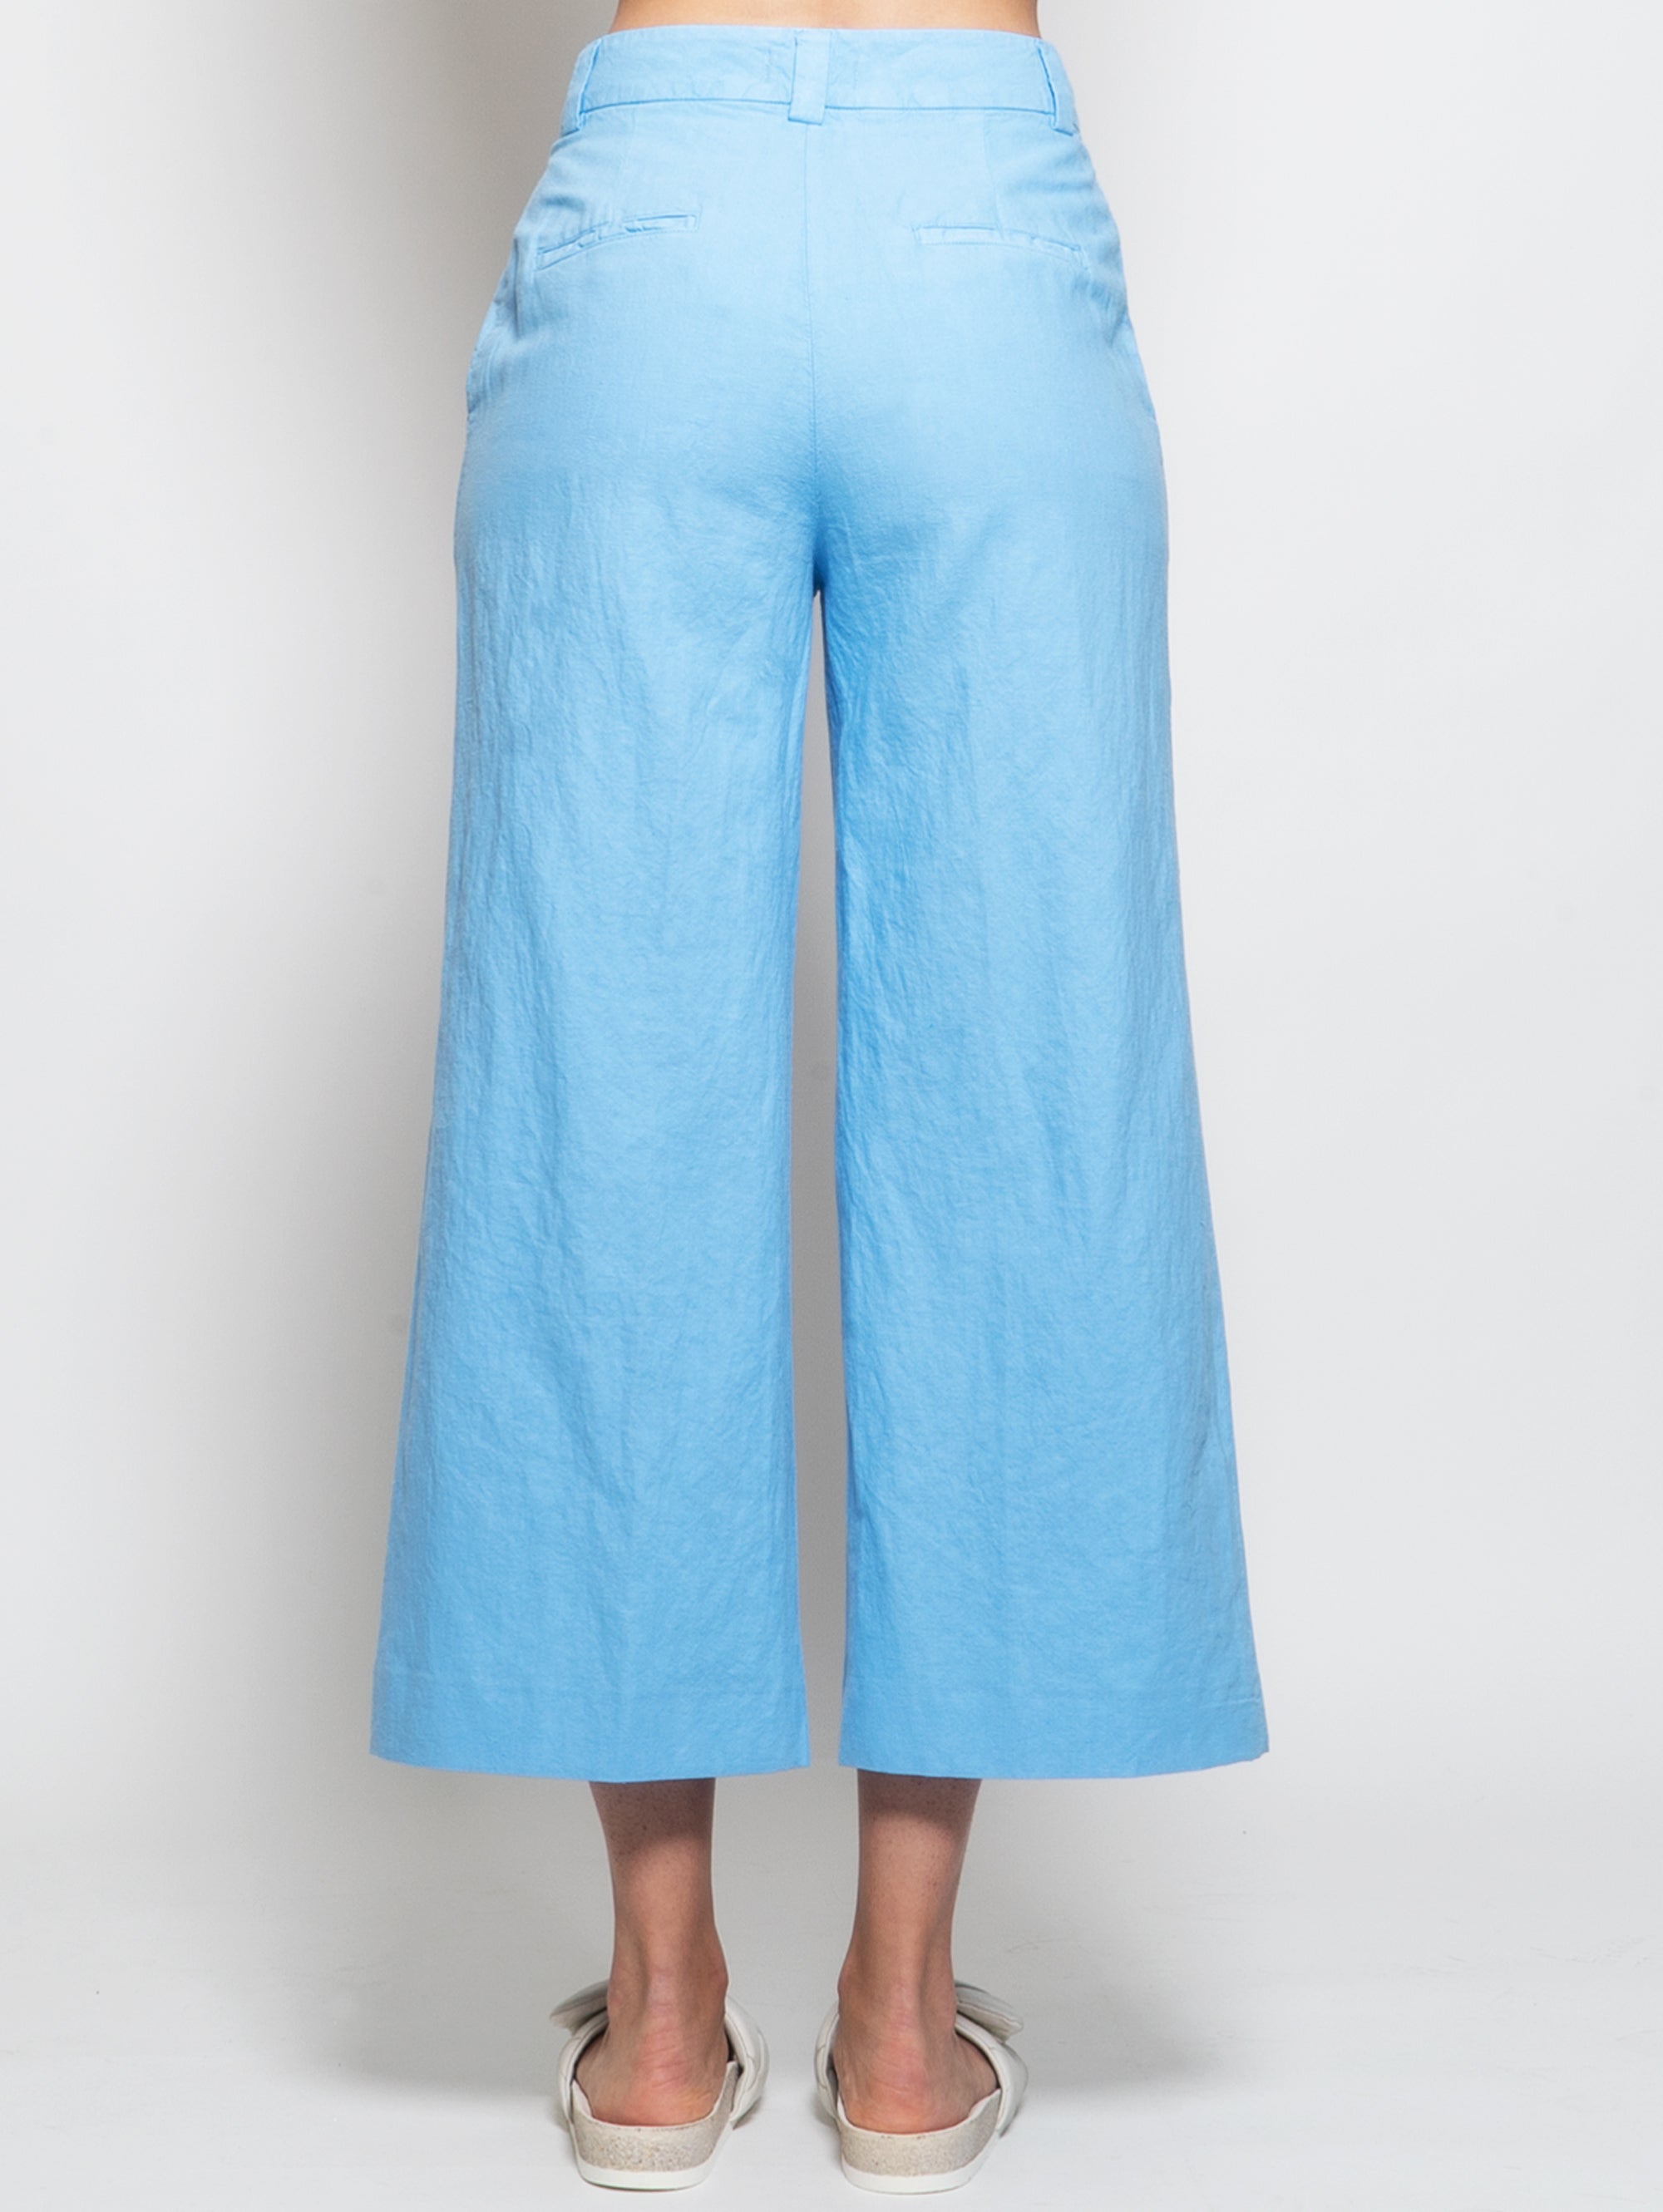 Light blue linen and cotton trousers